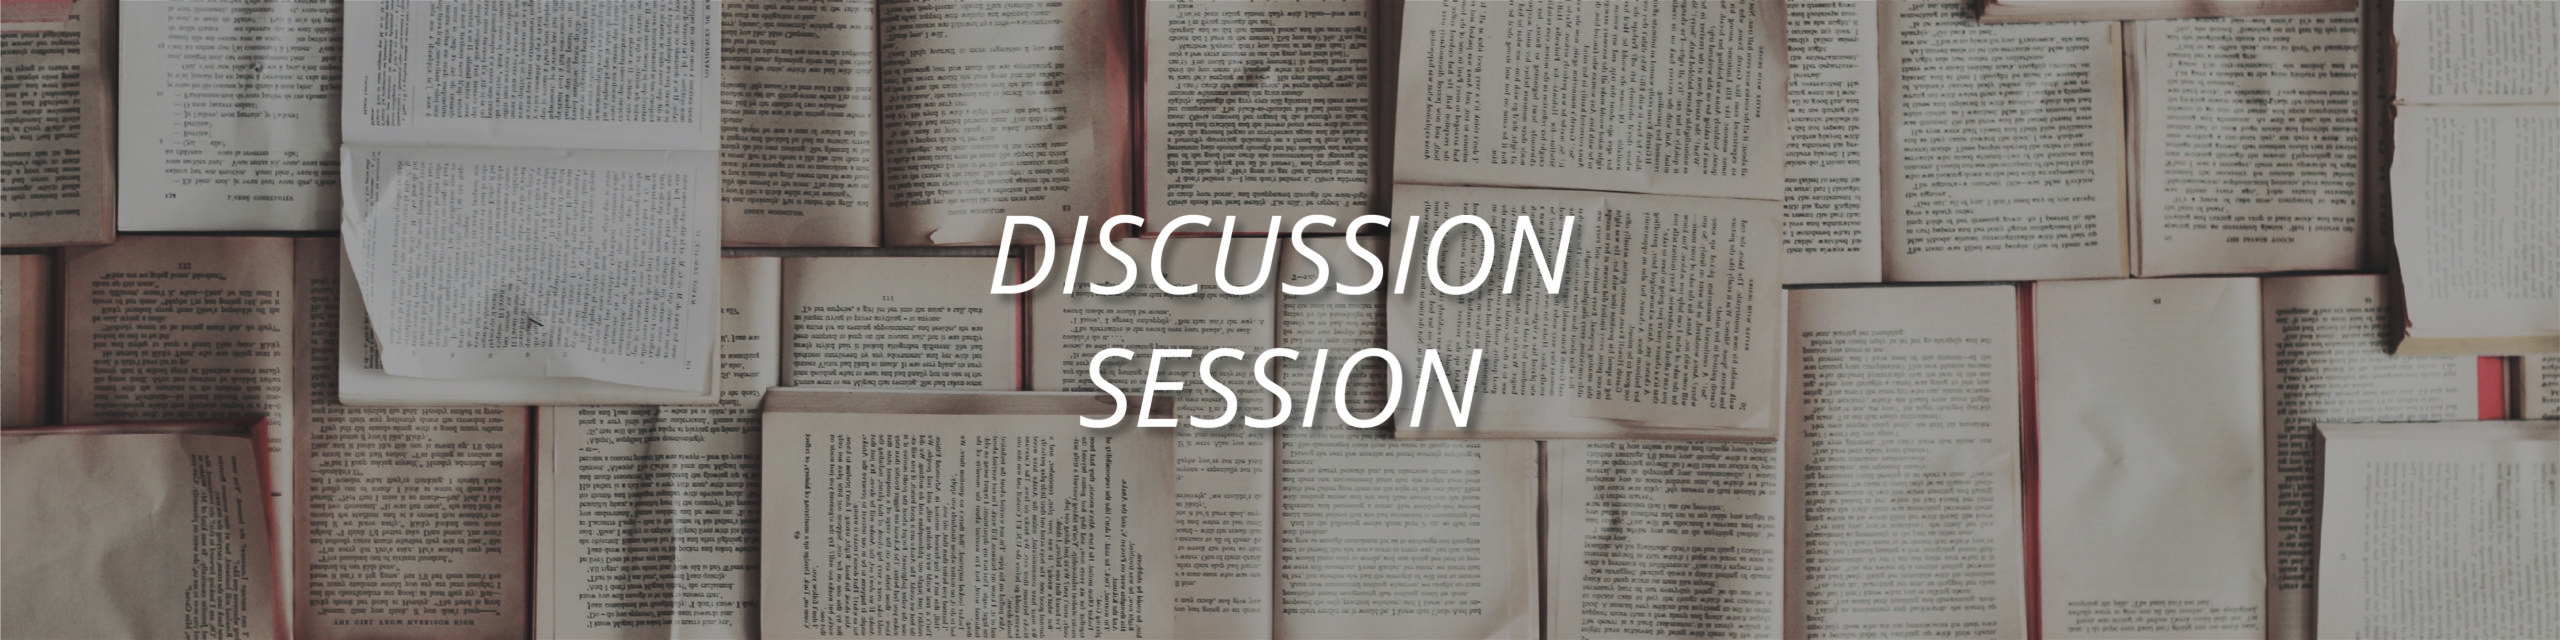 discussion section banner with open books as background